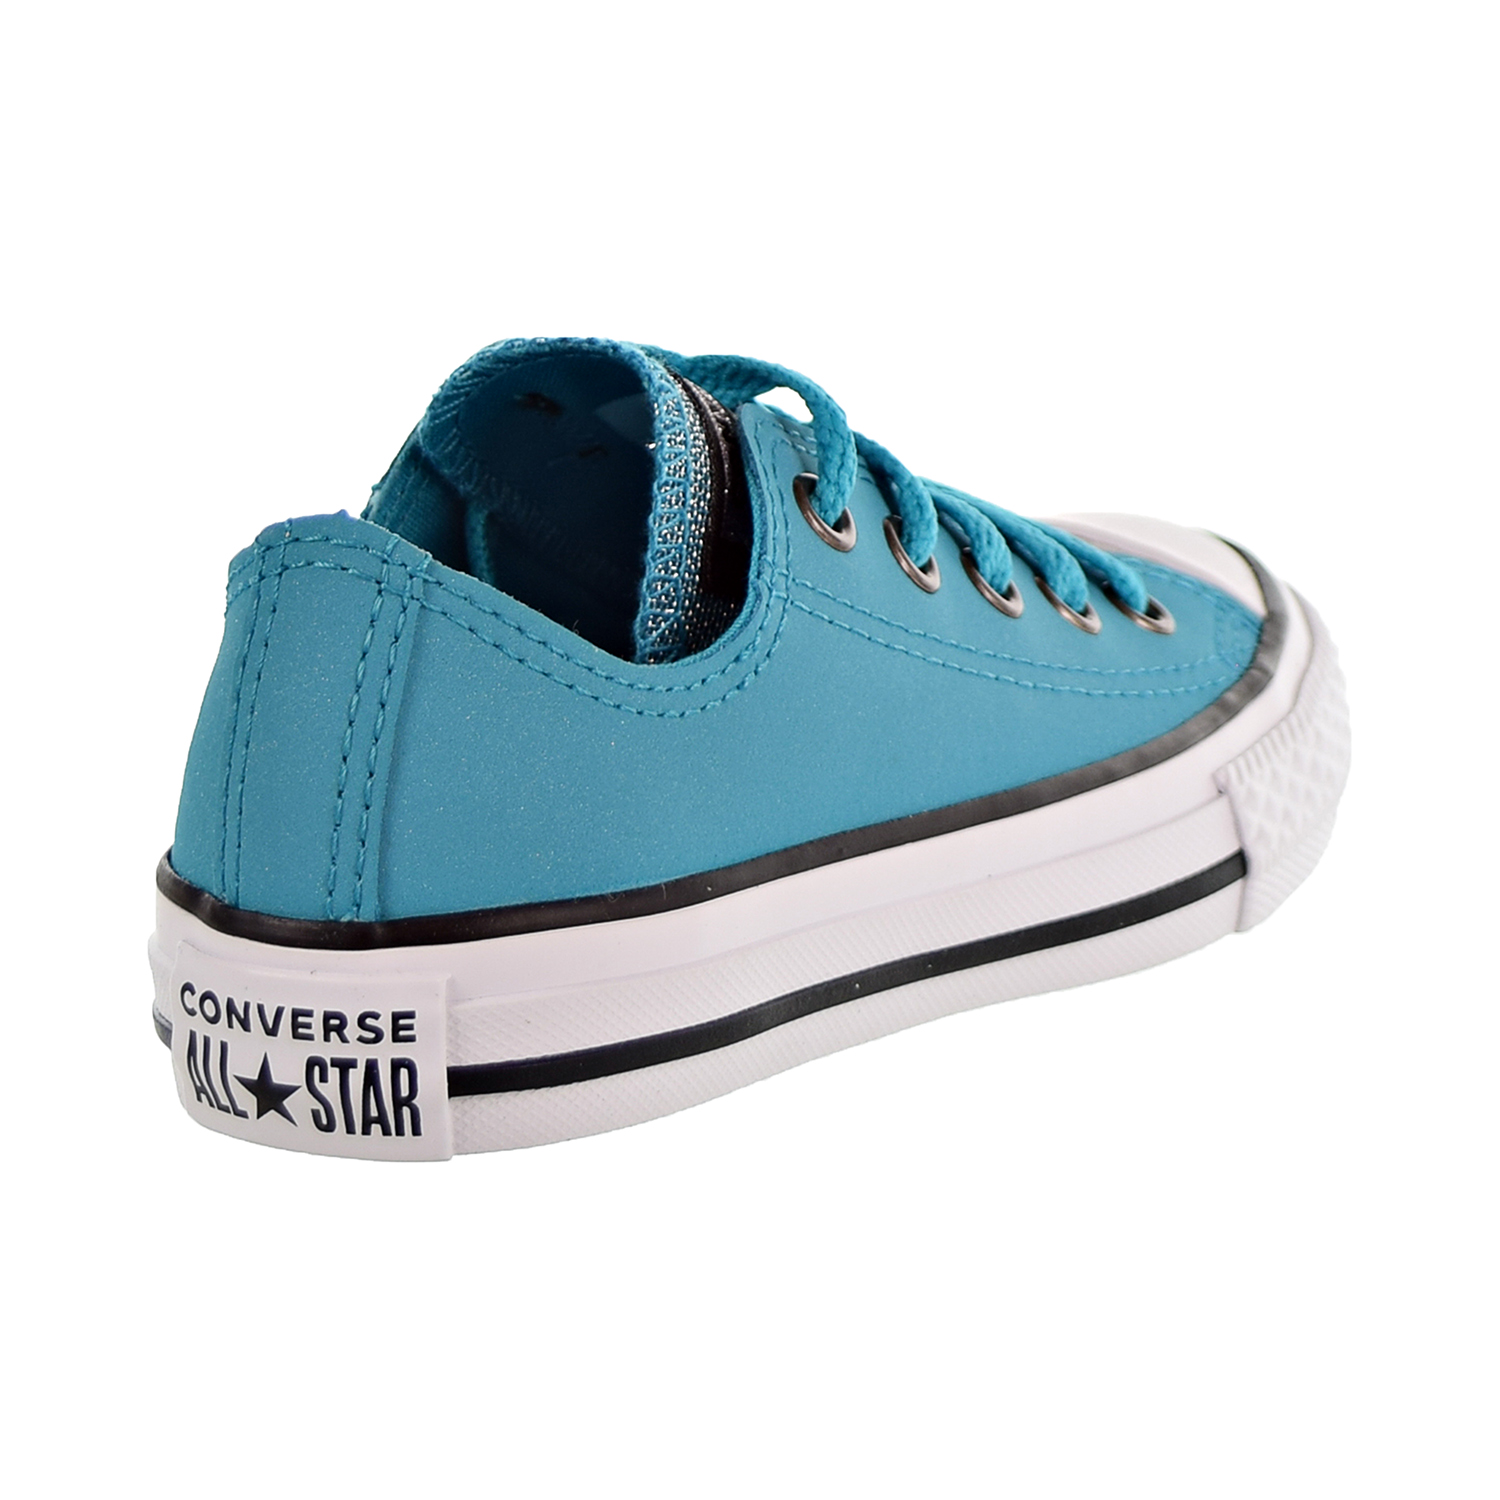 Converse Chuck Taylor All Star Ox Kids Shoes Rapid Teal/Black/White ...